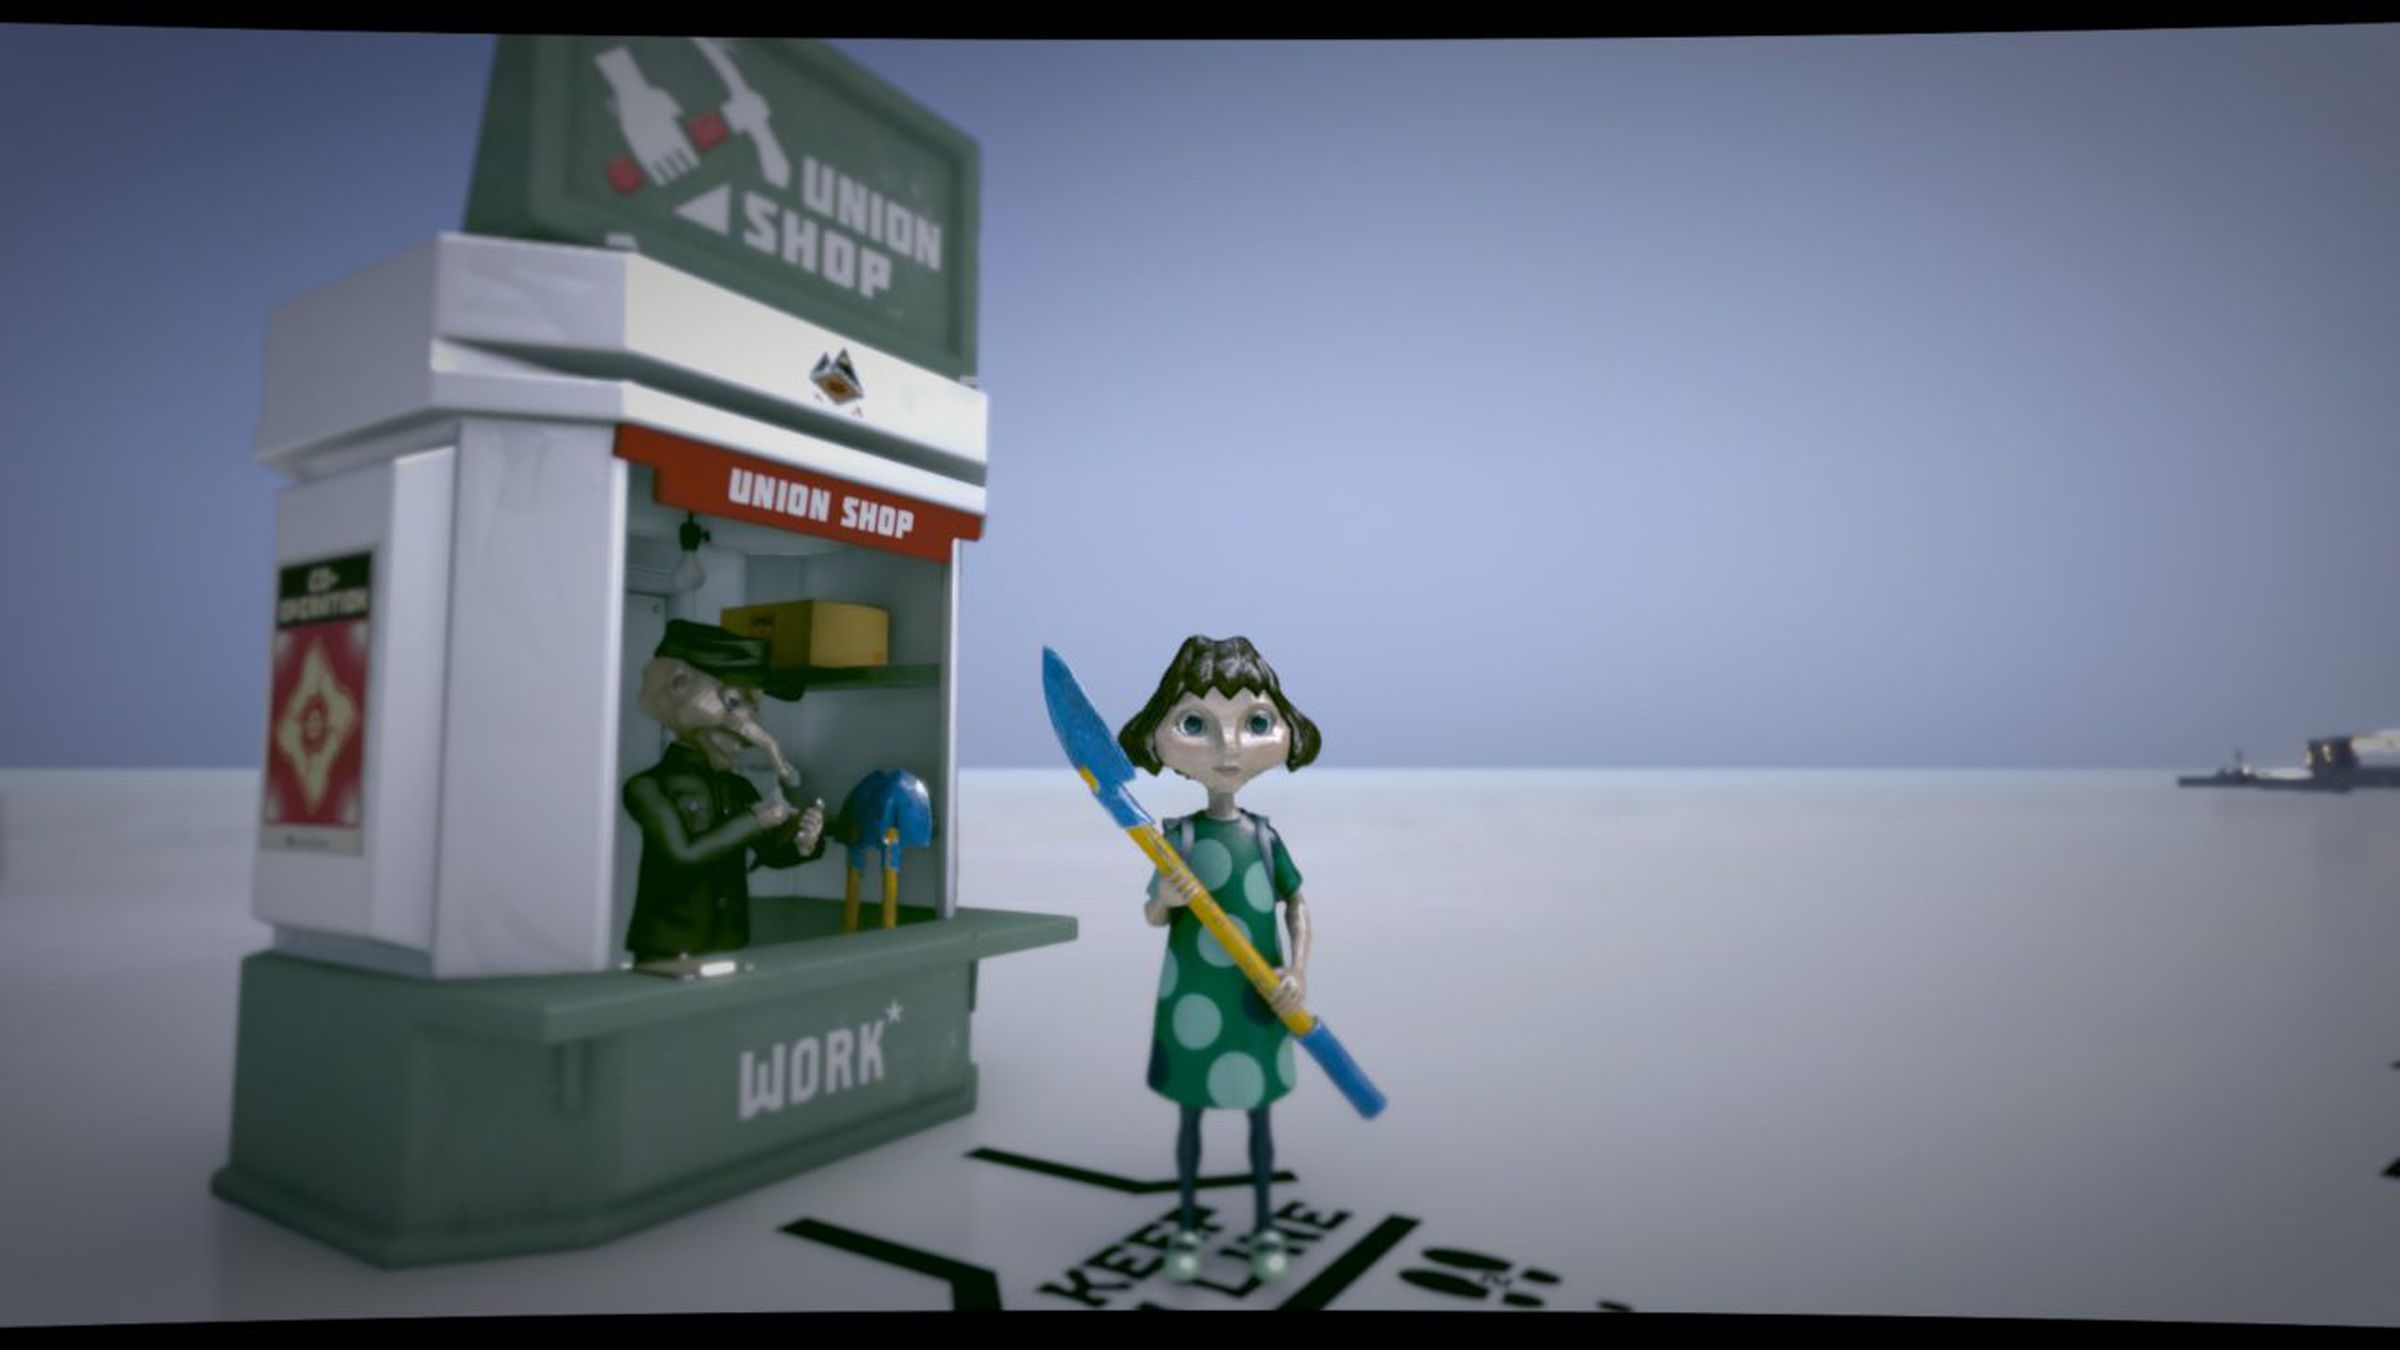 A screenshot from The Tomorrow Children shows a young boy holding what appears to be a shovel.